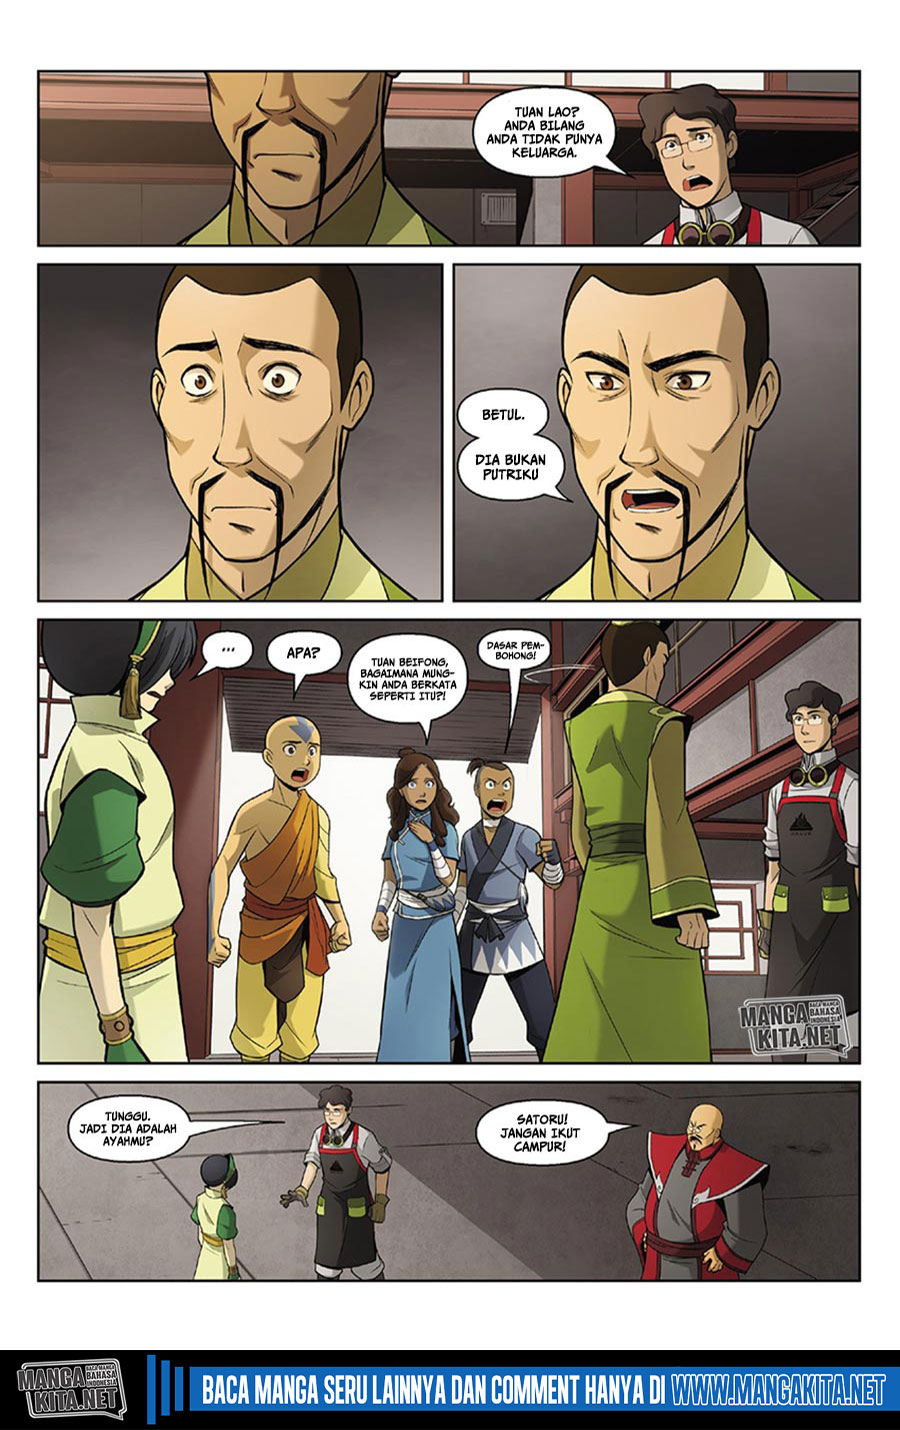 Avatar The Last Airbender – The Rift Chapter 2.1